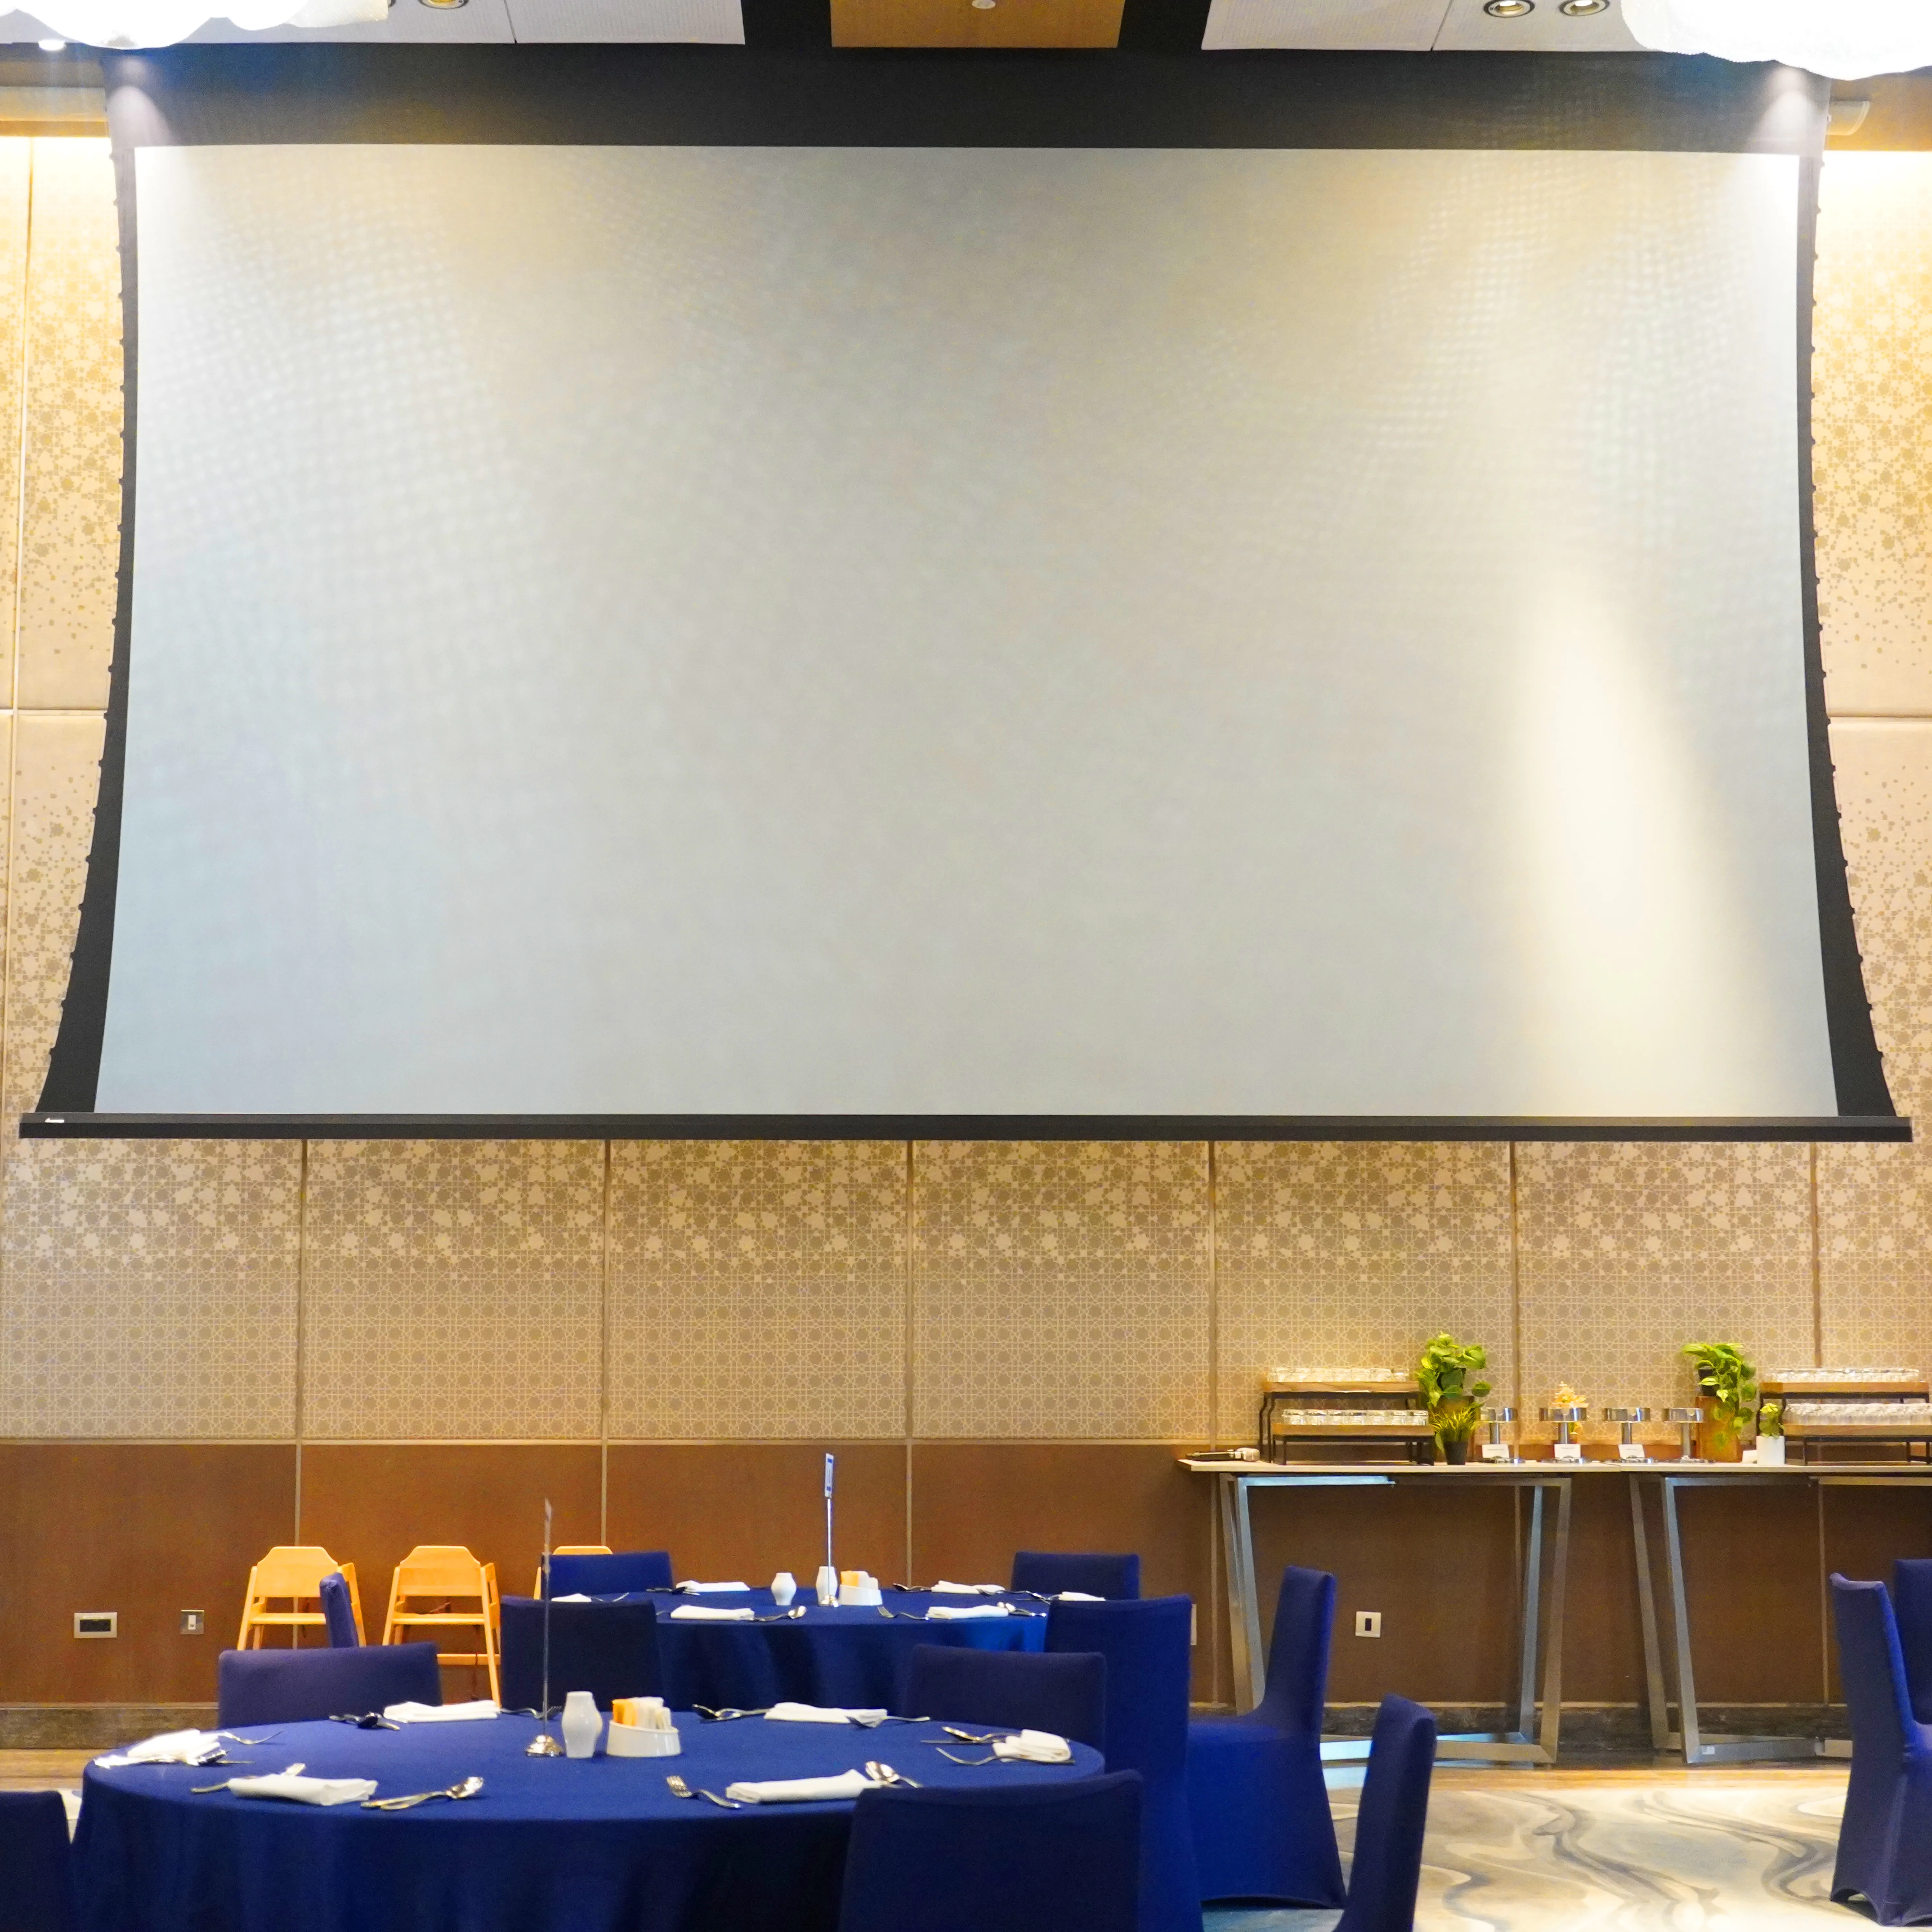 Hilton Abu Dhabi Makeover with Draper Audiovisual Products